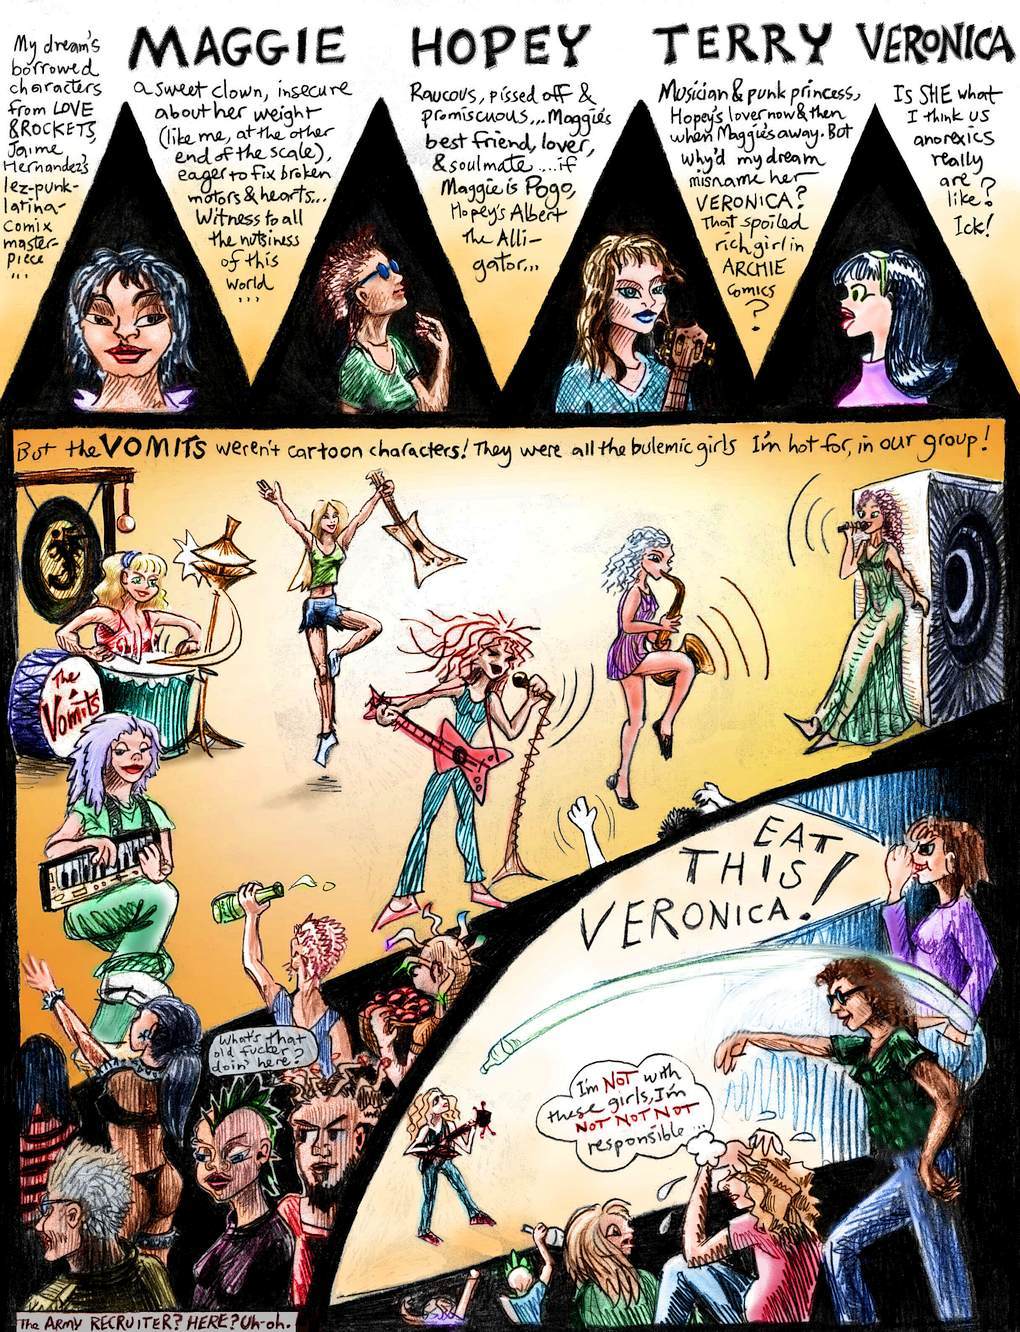 Comic of a dream by Chris Wayan about anorexia. Veronica's band is called the Vomits, and they're all bulemic.